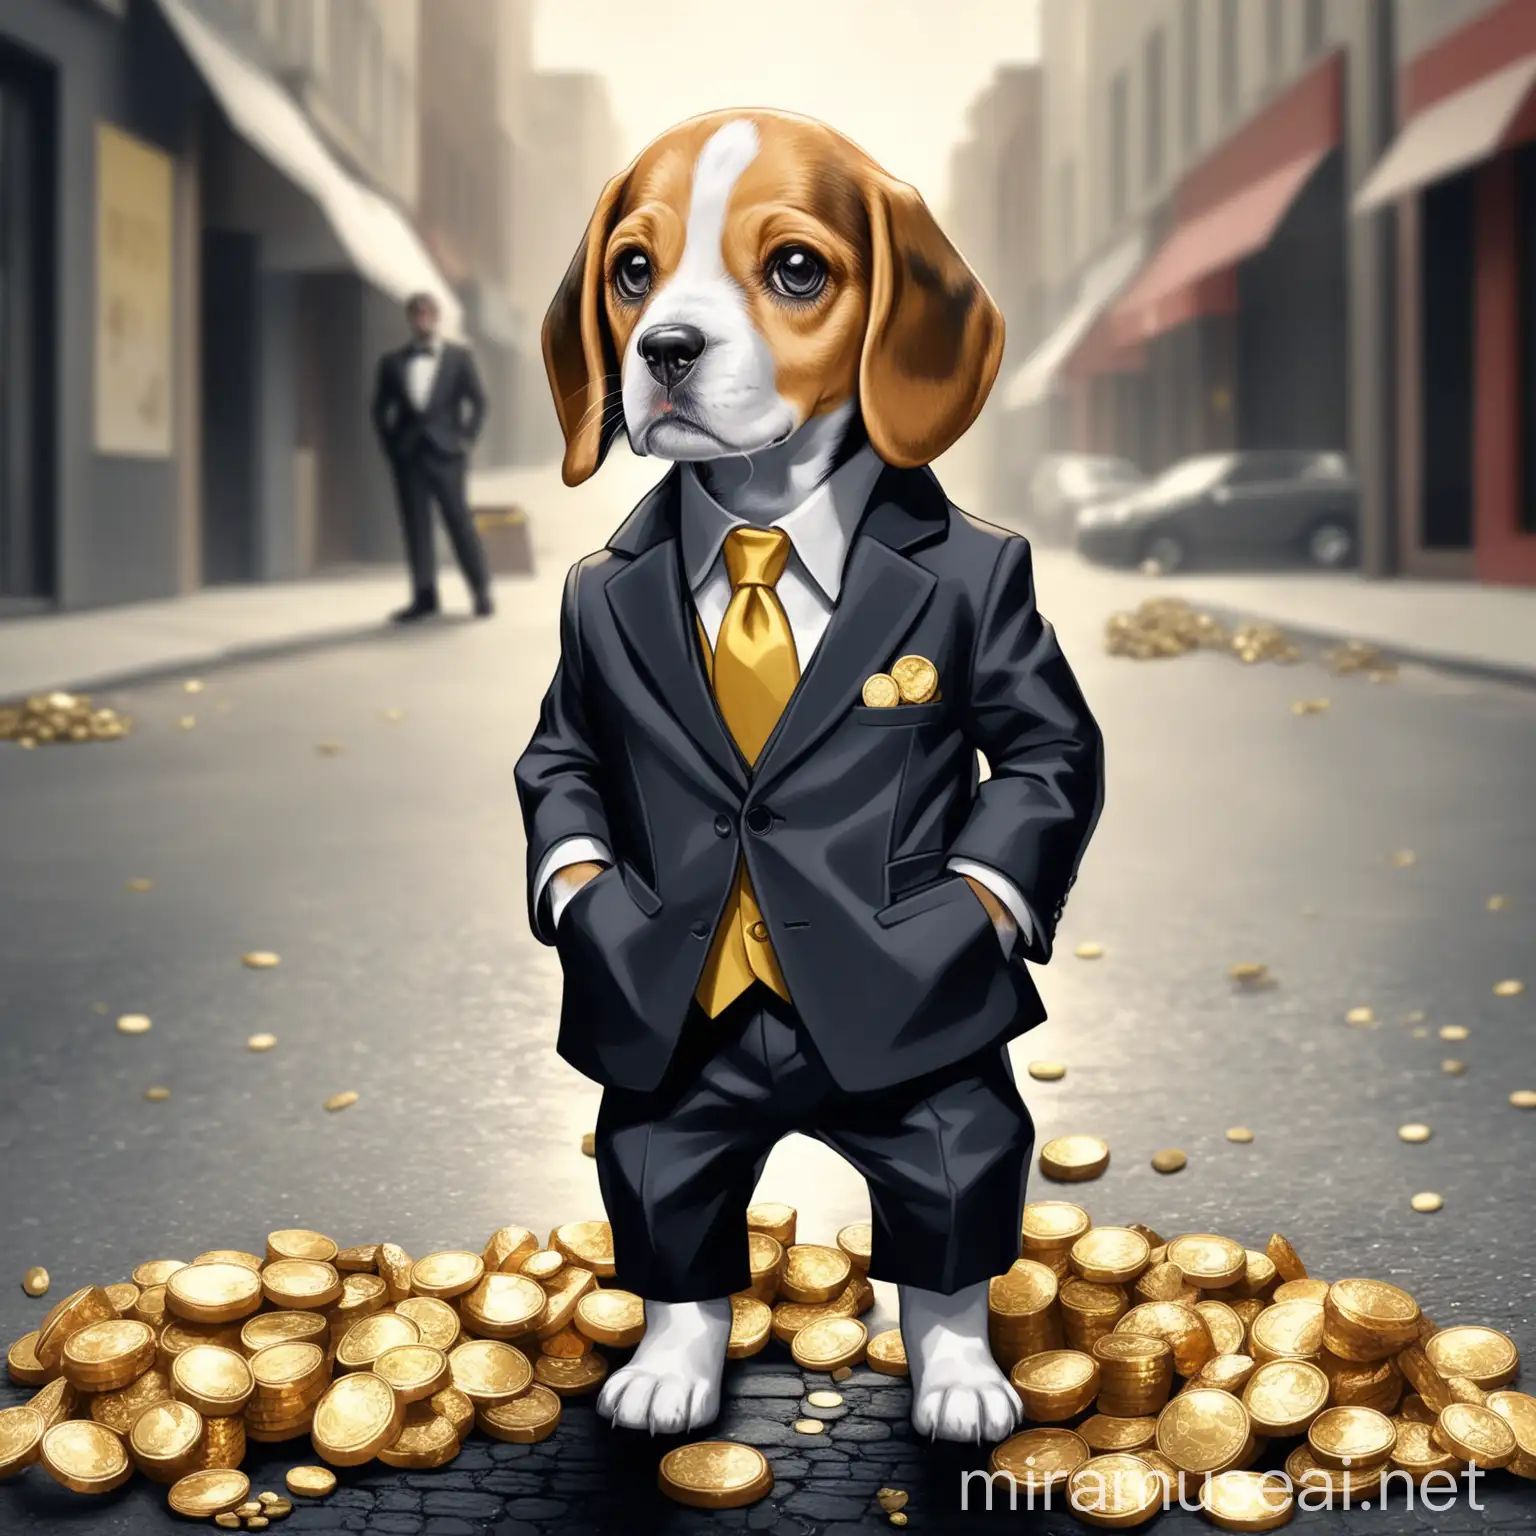 Adorable Beagle Puppy in Dapper Suit Collecting Gold Coins and Nuggets in City Streets